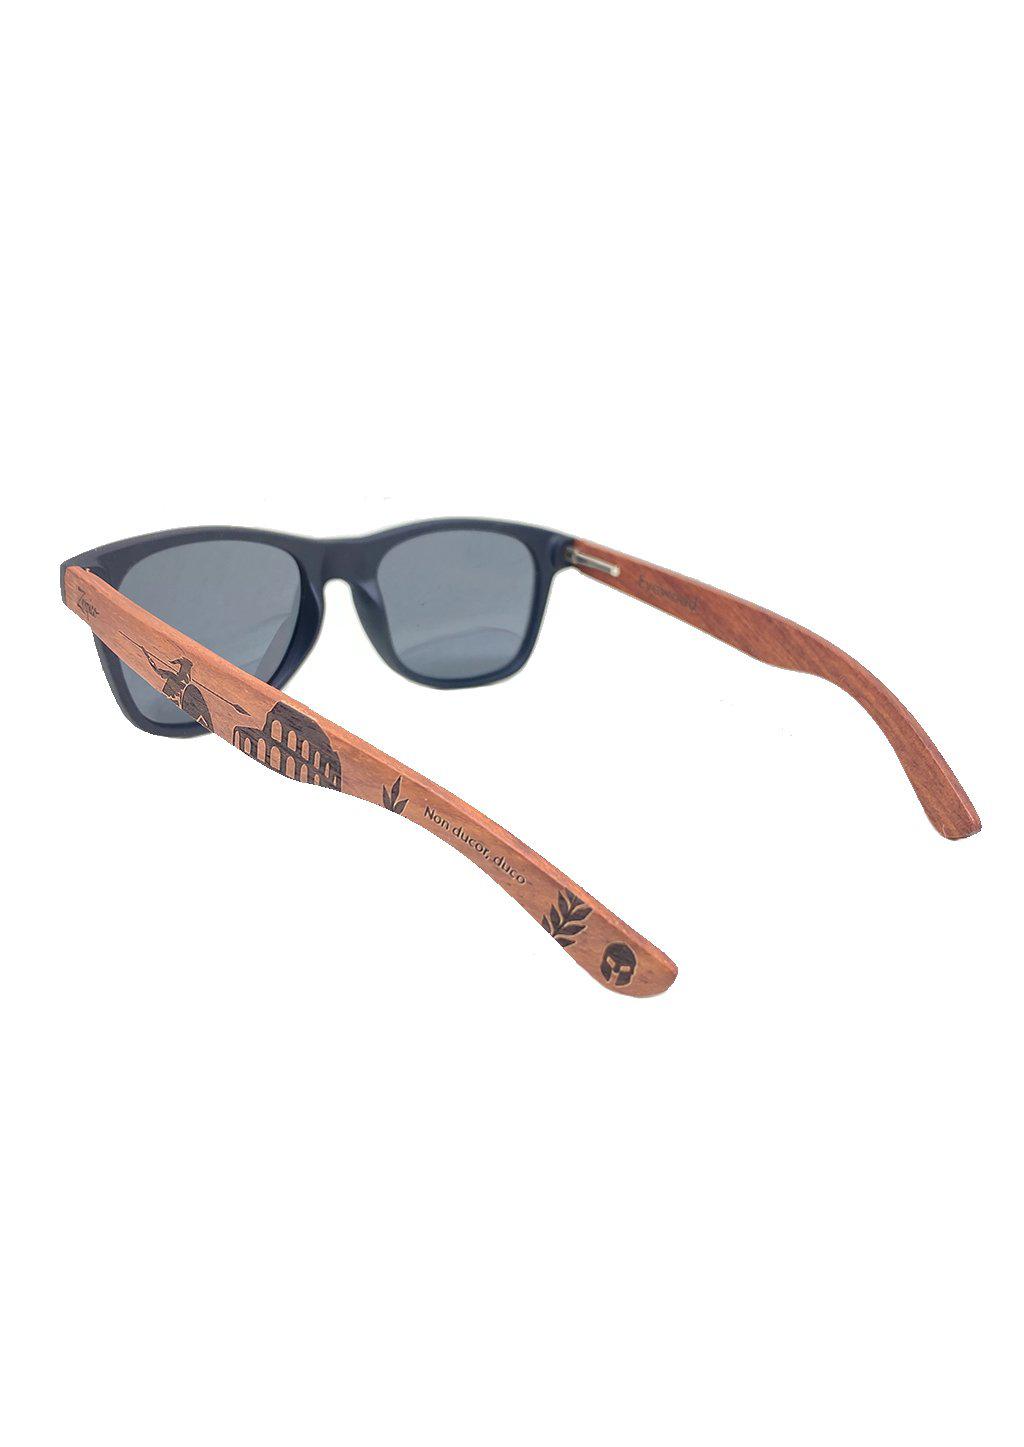 Engraved wooden sunglasses - Gladiator is inspired of the Gladiators from Ancient Rome. Studio photo from the back.